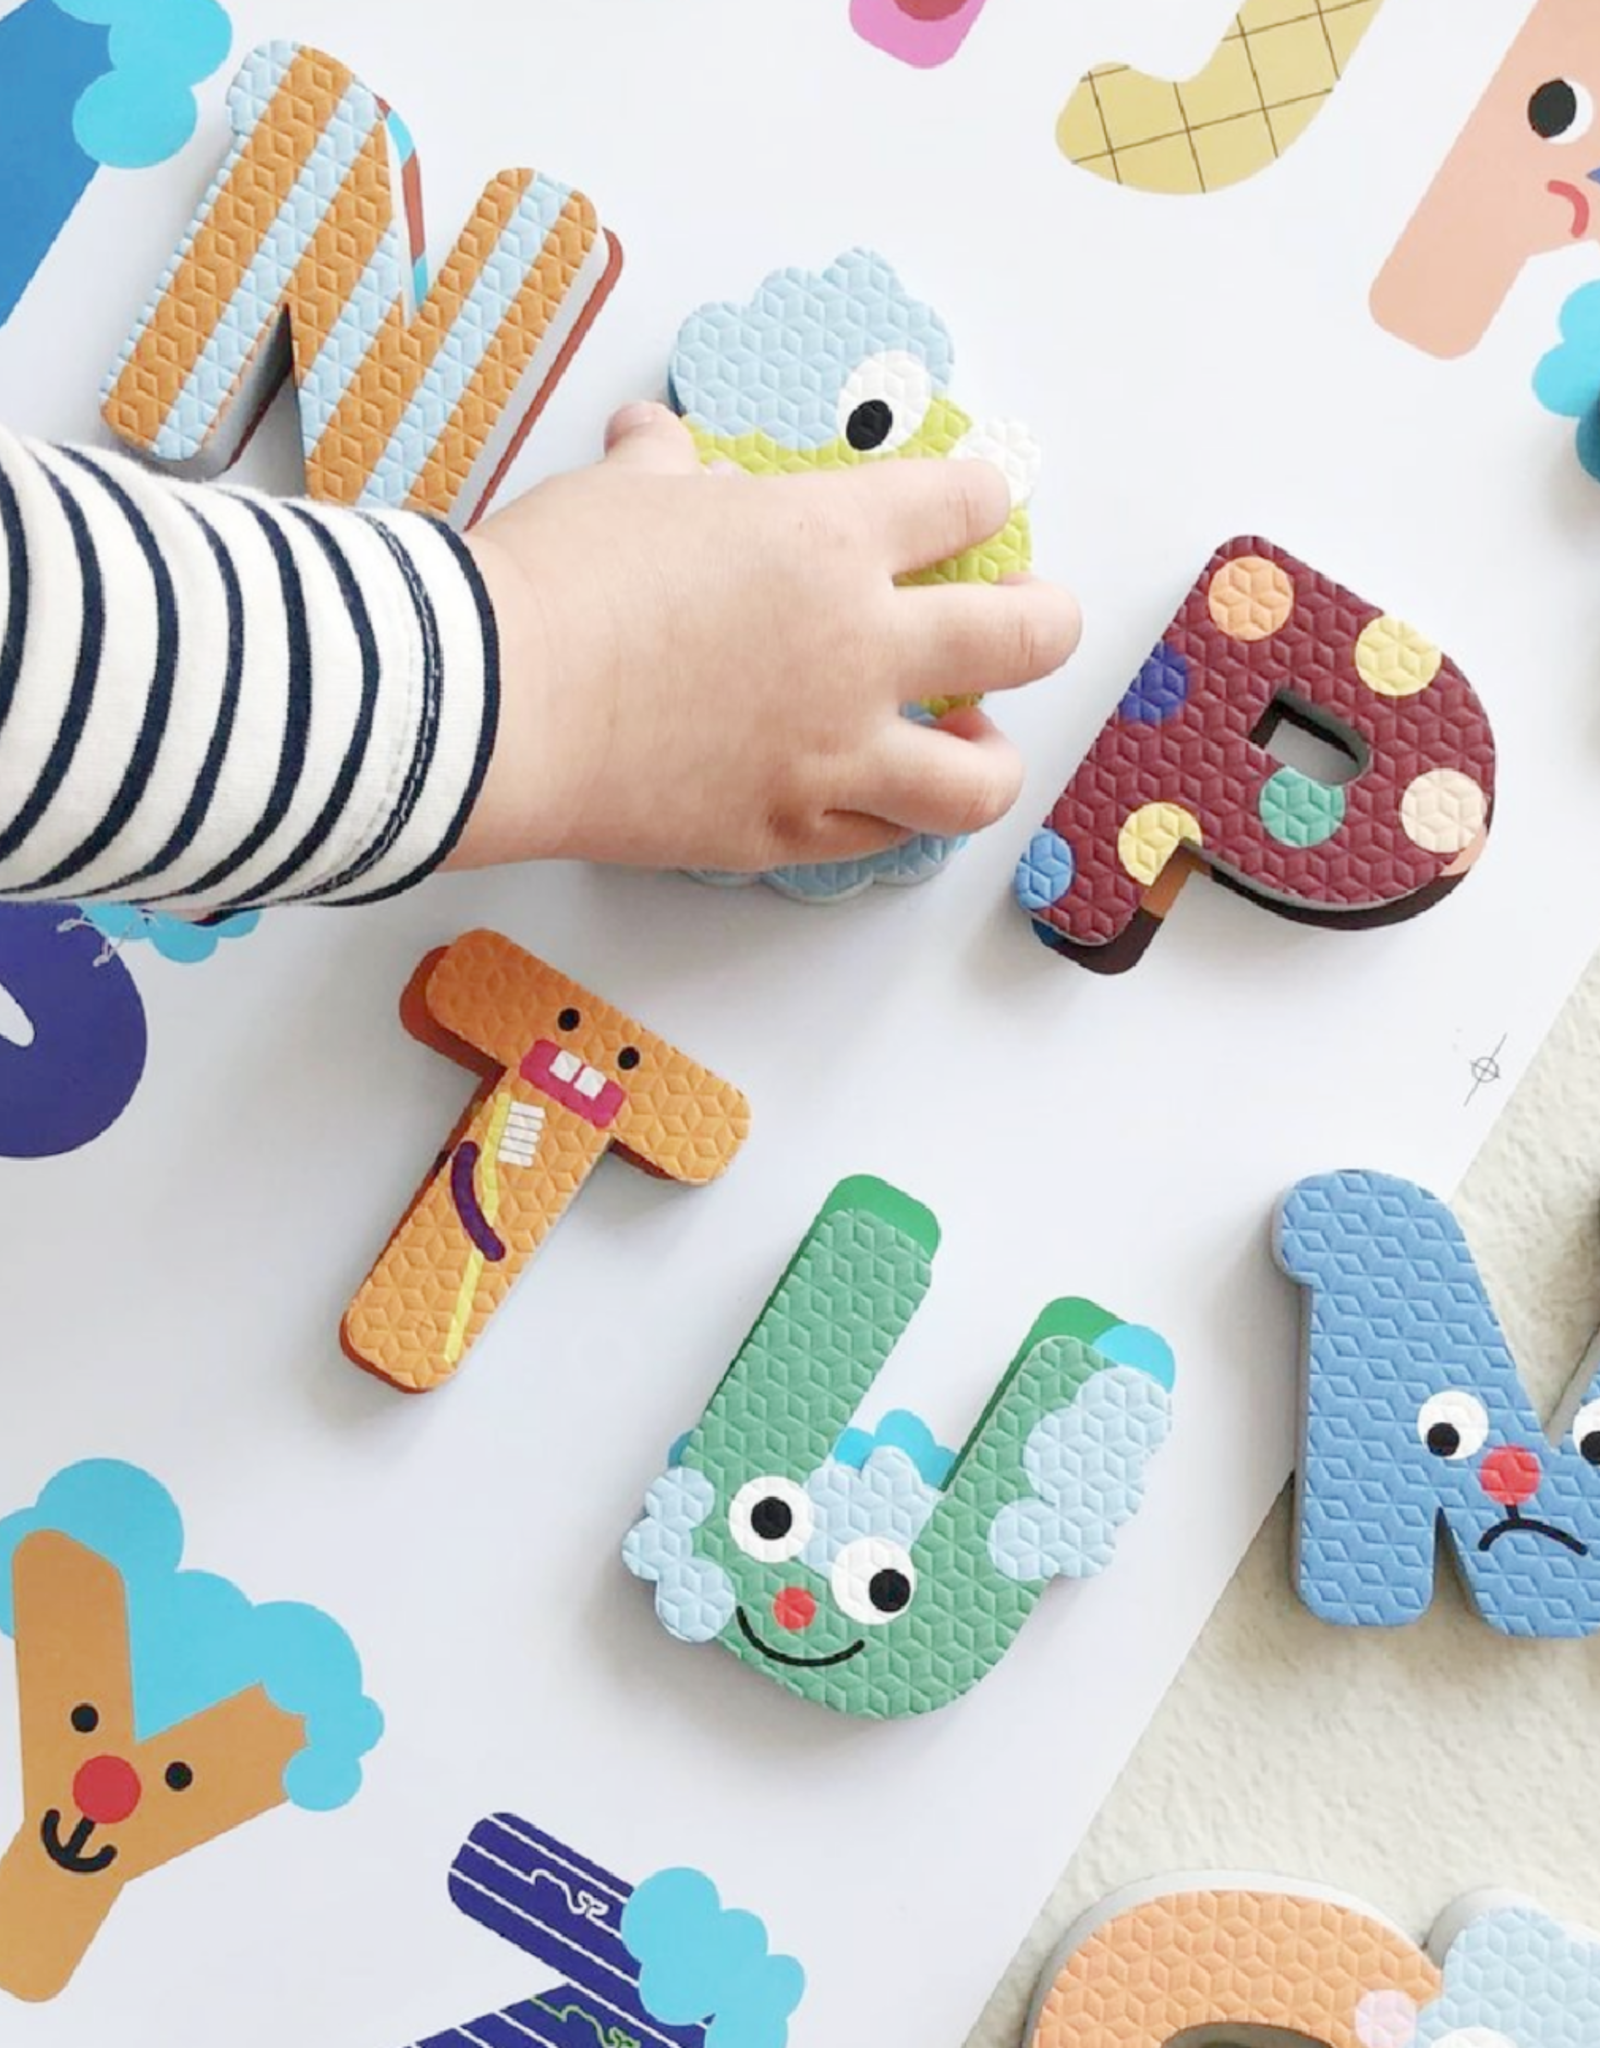 Nahthing-project Alphabet Creative Play Set